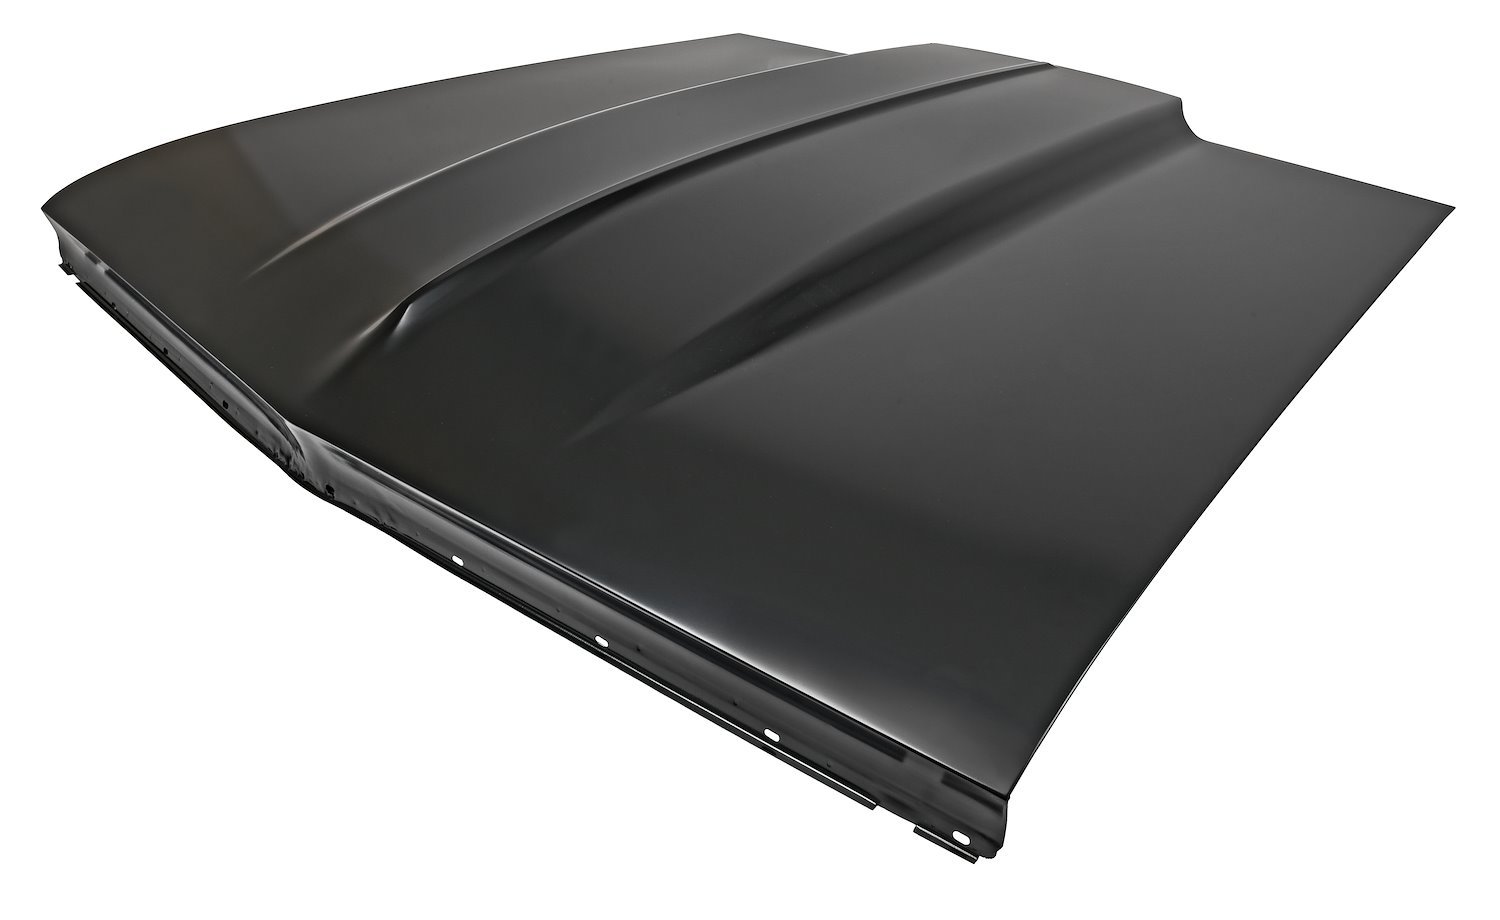 Steel Cowl Induction Hood for 1966 Chevrolet Chevelle, Malibu & El Camino [2 in. Cowl Induction Scoop]